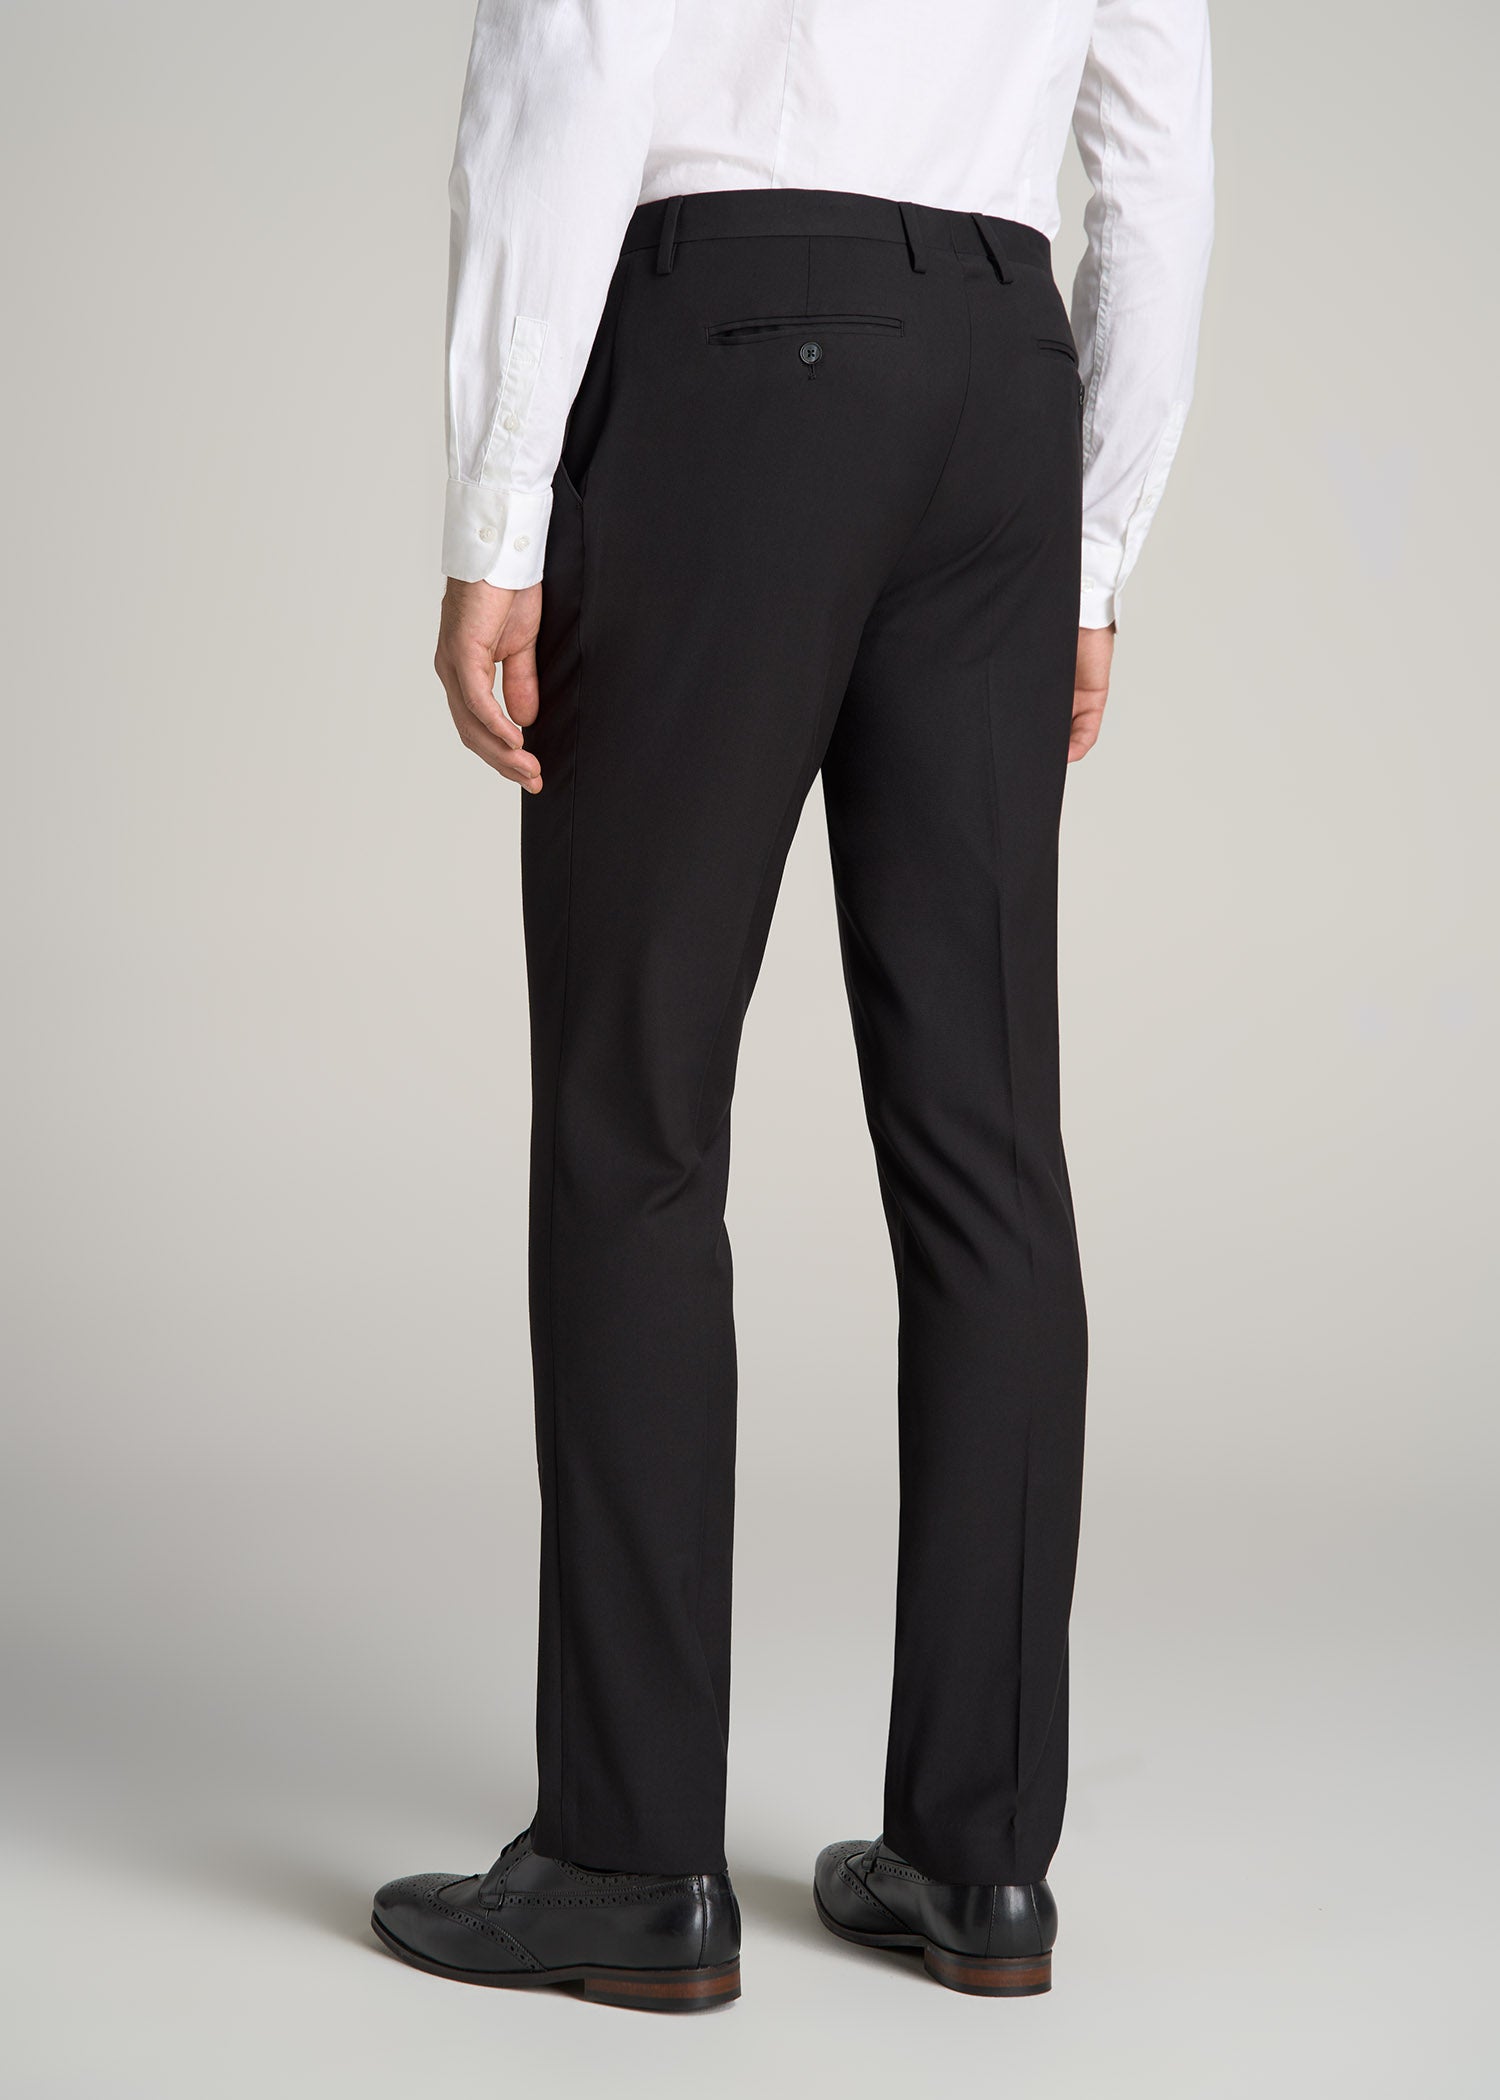 ALLSAINTS Spica Relaxed Fit Dress Pants | Bloomingdale's